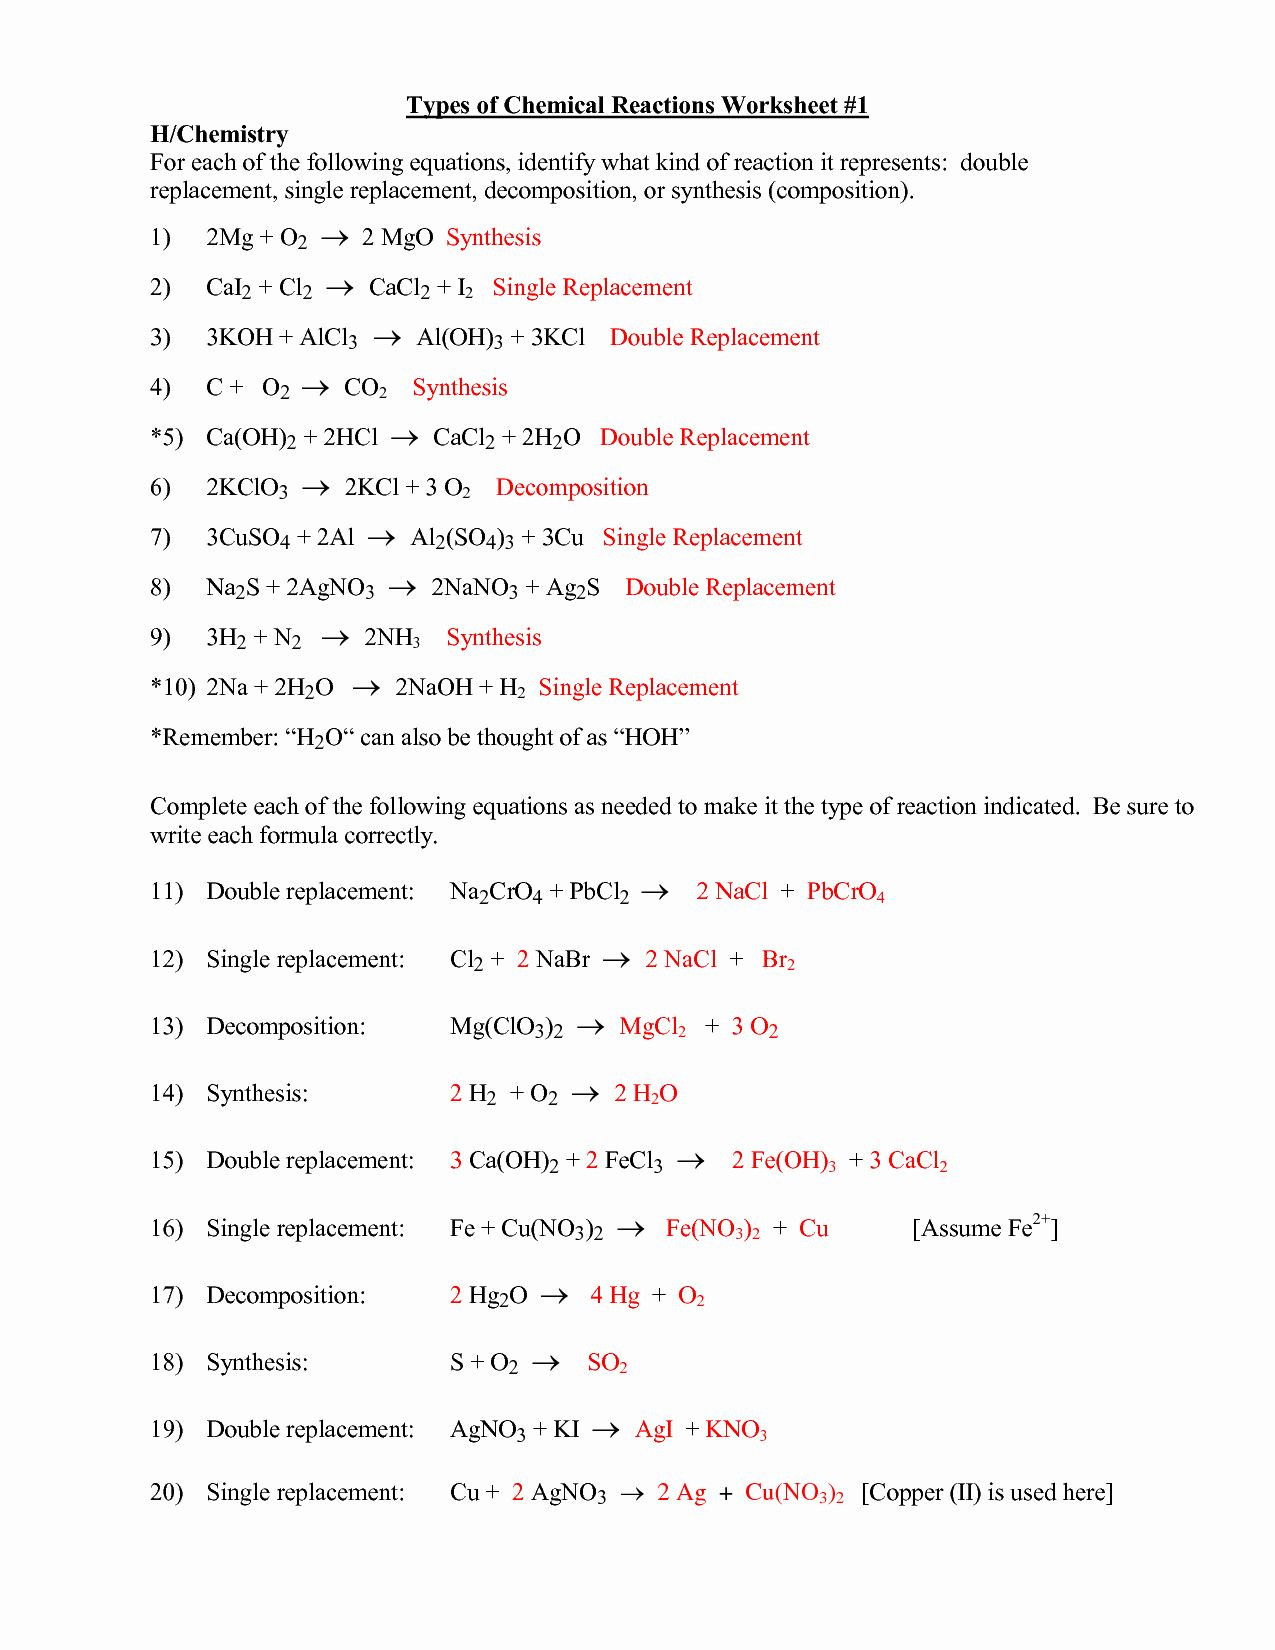 Types Of Reactions Worksheet Classifying Chemical Reactions Worksheet Answers New 16 Best